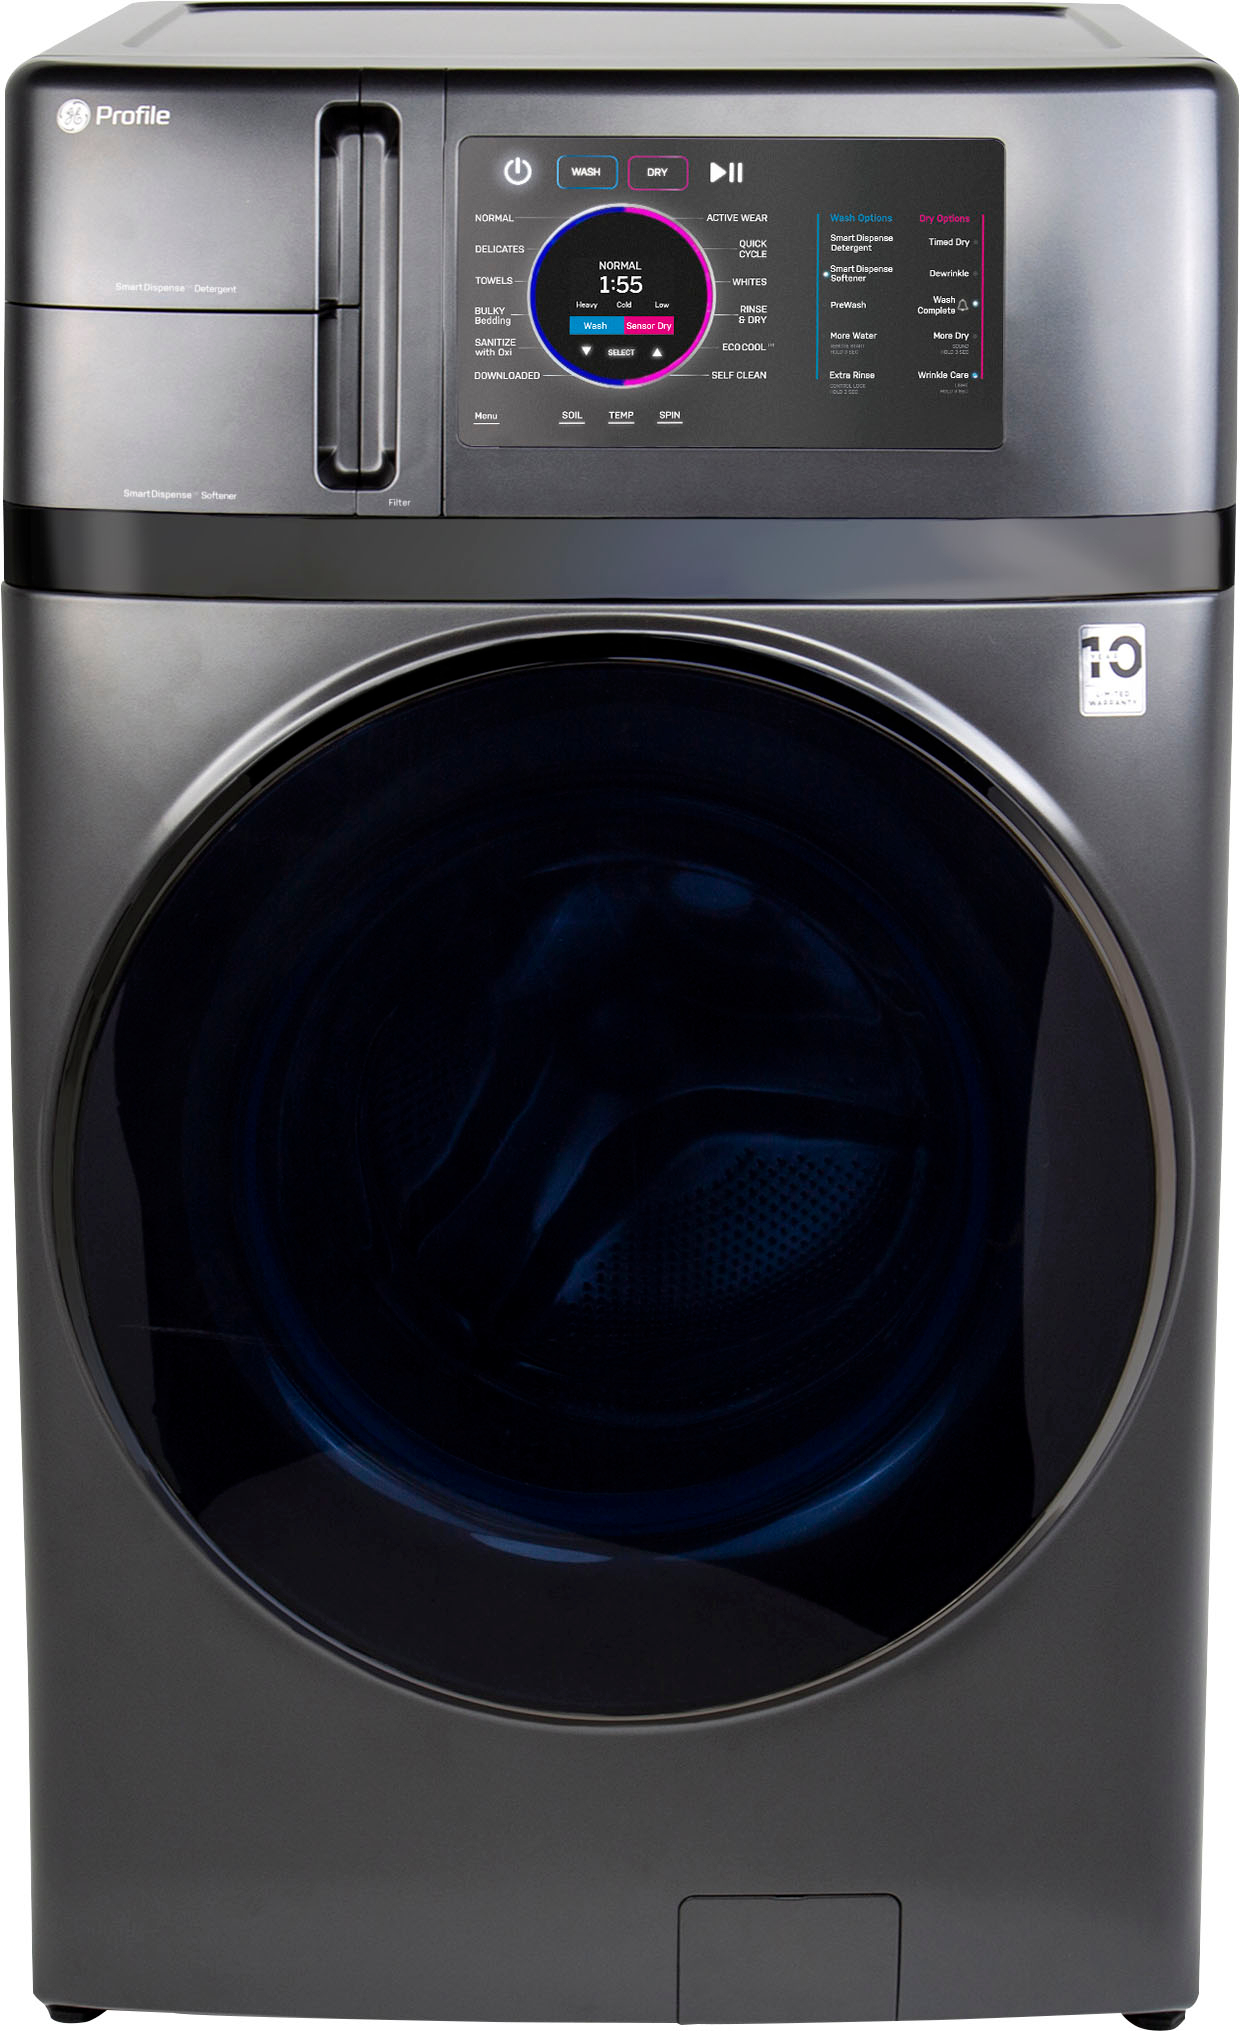 GE Profile - 4.8 cu. ft. UltraFast Combo Electric Washer & Dryer with Ventless Heat Pump Technology - Carbon Graphite